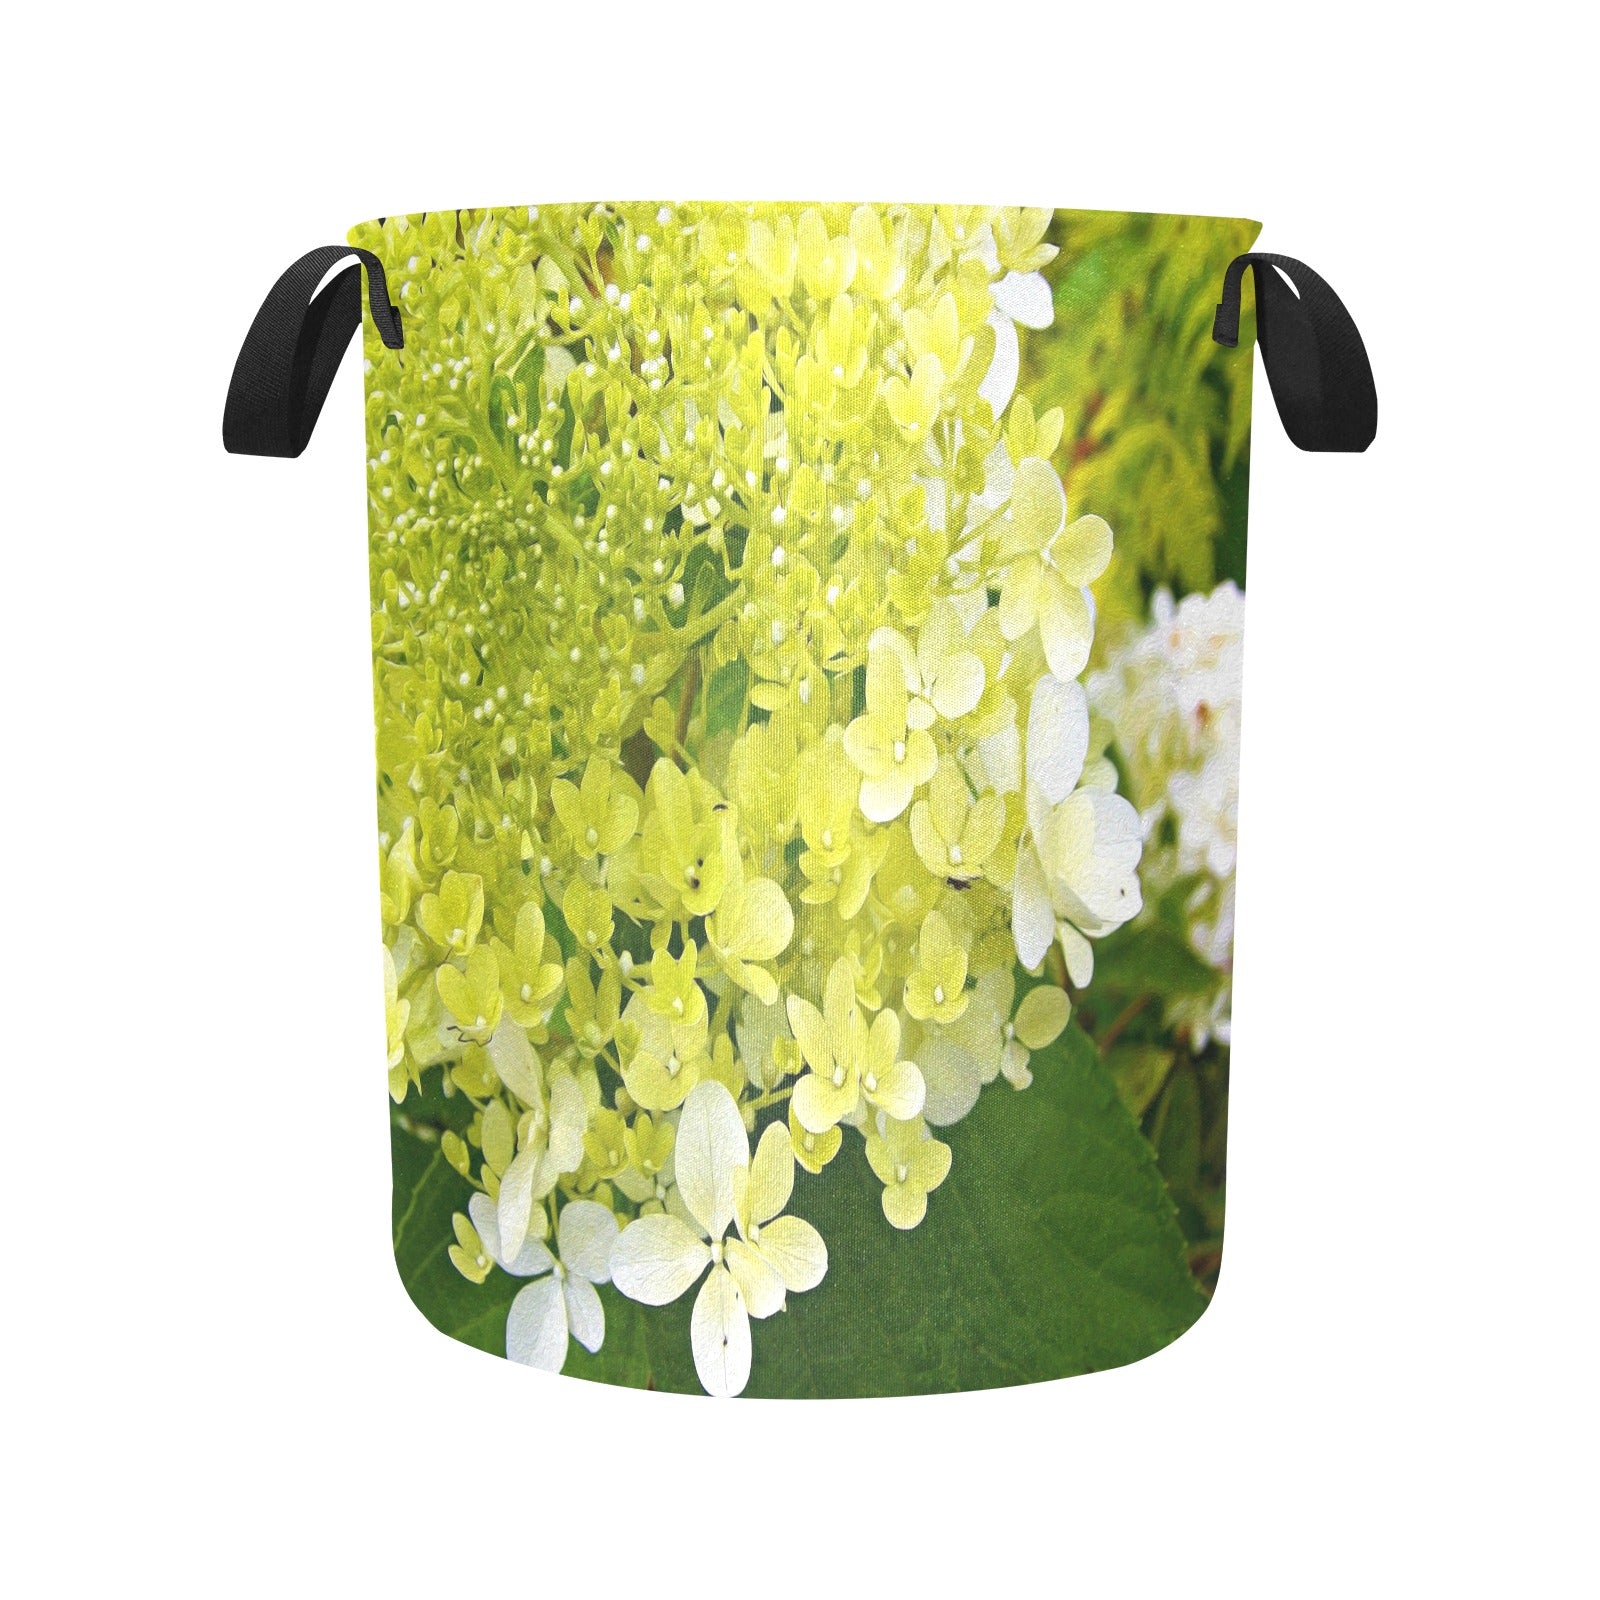 Fabric Laundry Basket with Handles, Elegant Chartreuse Green Limelight Hydrangea